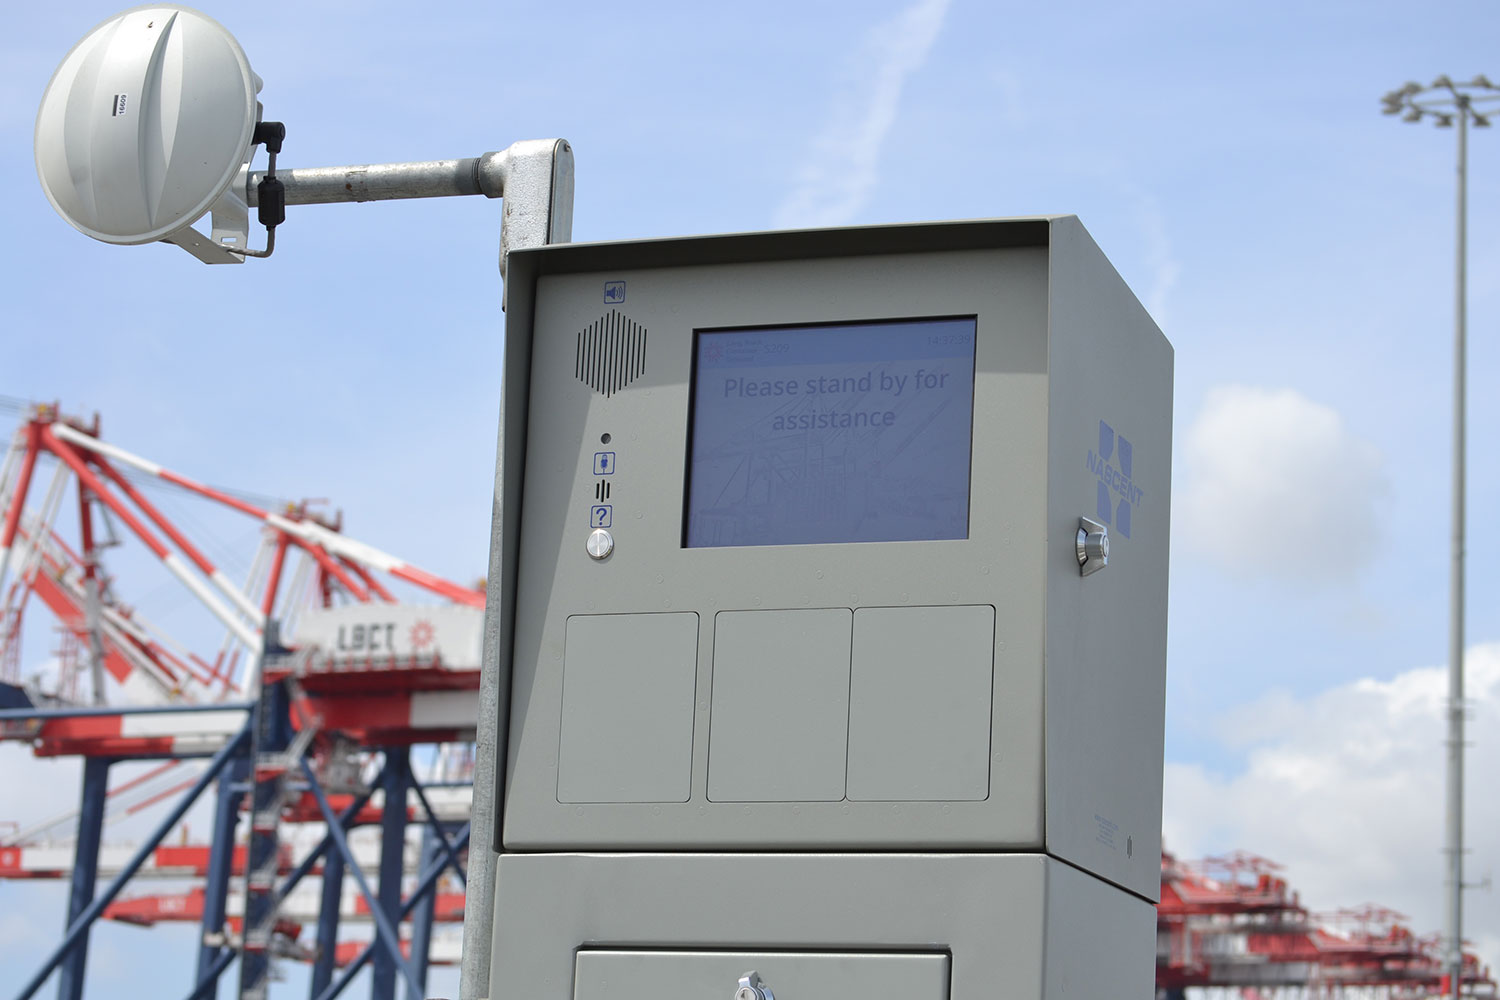 NASCENT’s LivePoint kiosks & callboxes are designed from the ground-up to ensure quality, dependability & durability to withstand even the harshest maritime conditions.